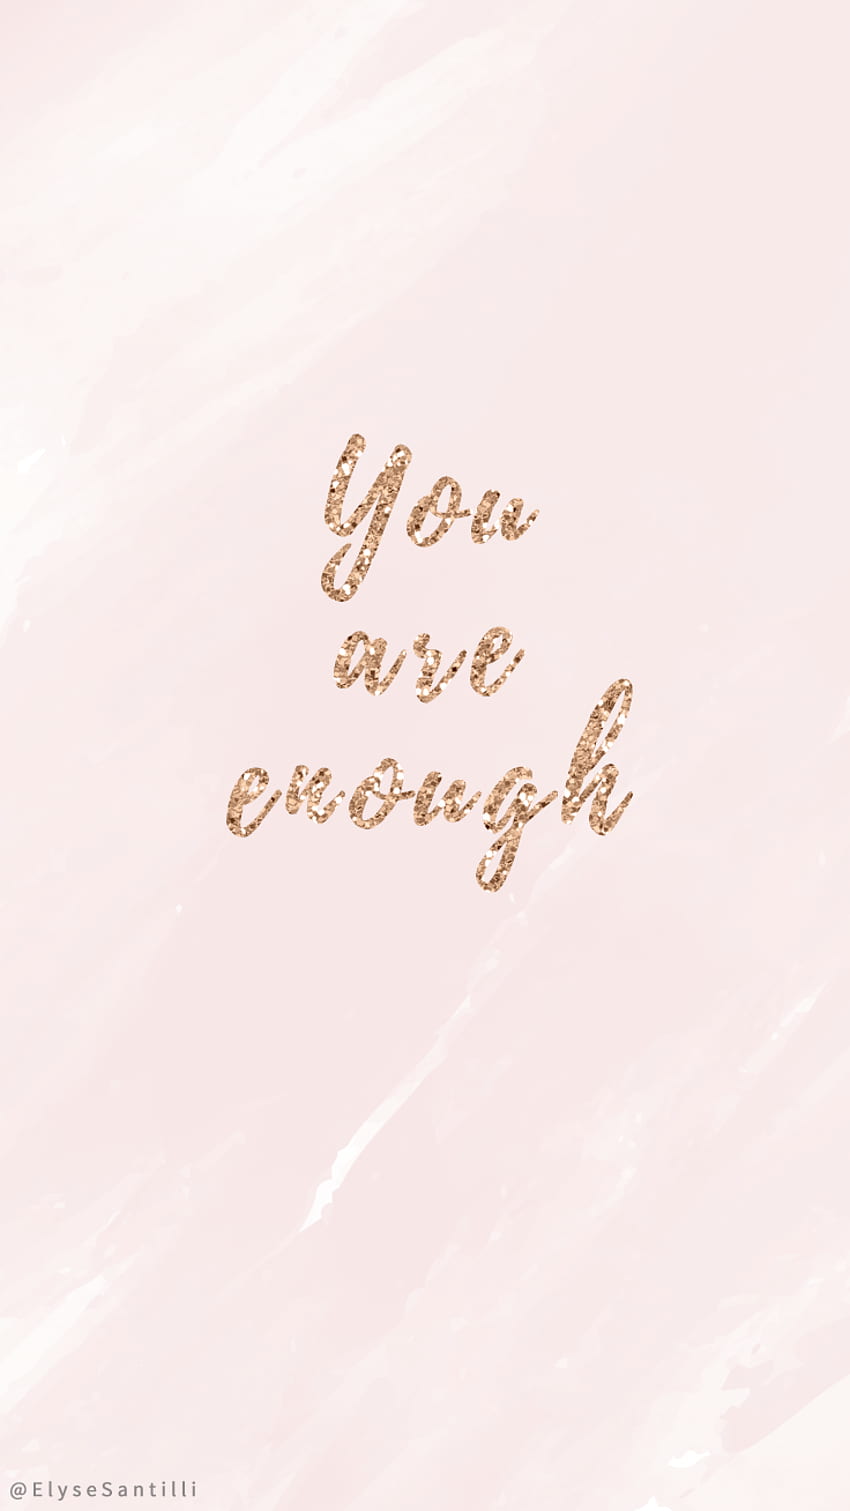 You are enough quote motivationalquotes quotes prettyquote  Quotes  lockscreen Lockscreen iphone quotes Wallpaper iphone quotes